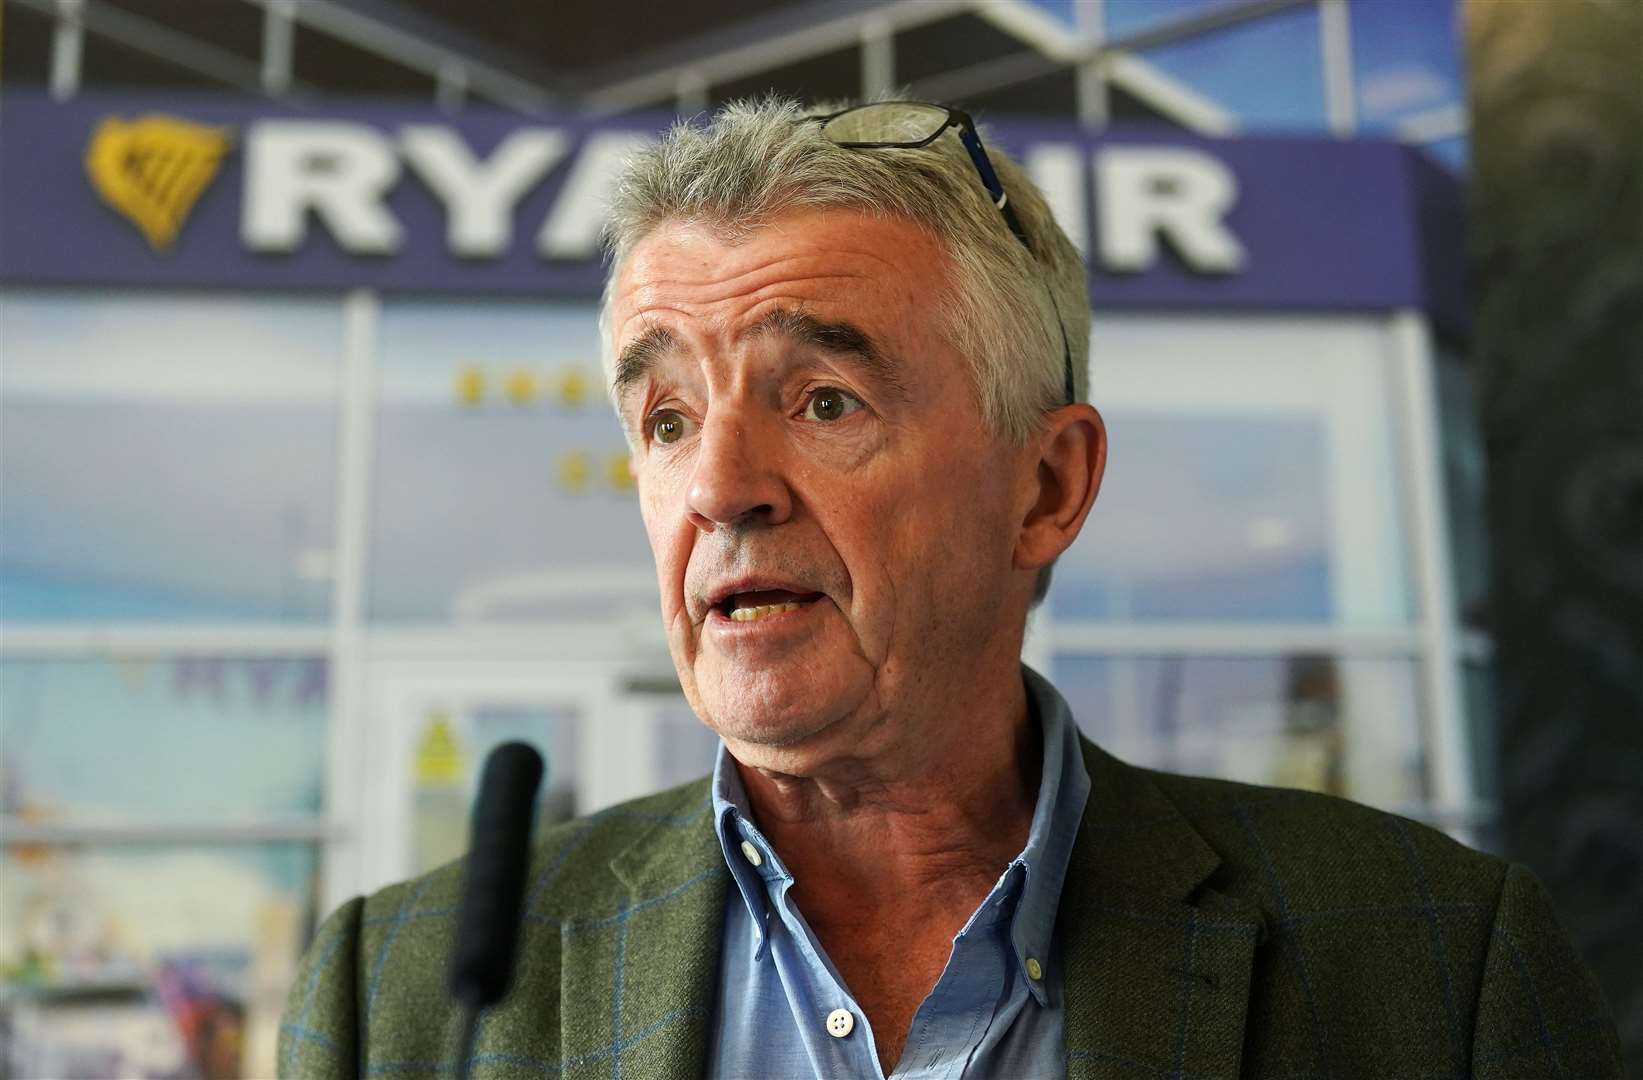 Ryanair boss Michael O’Leary called for the CEO of Nats to quit (PA)